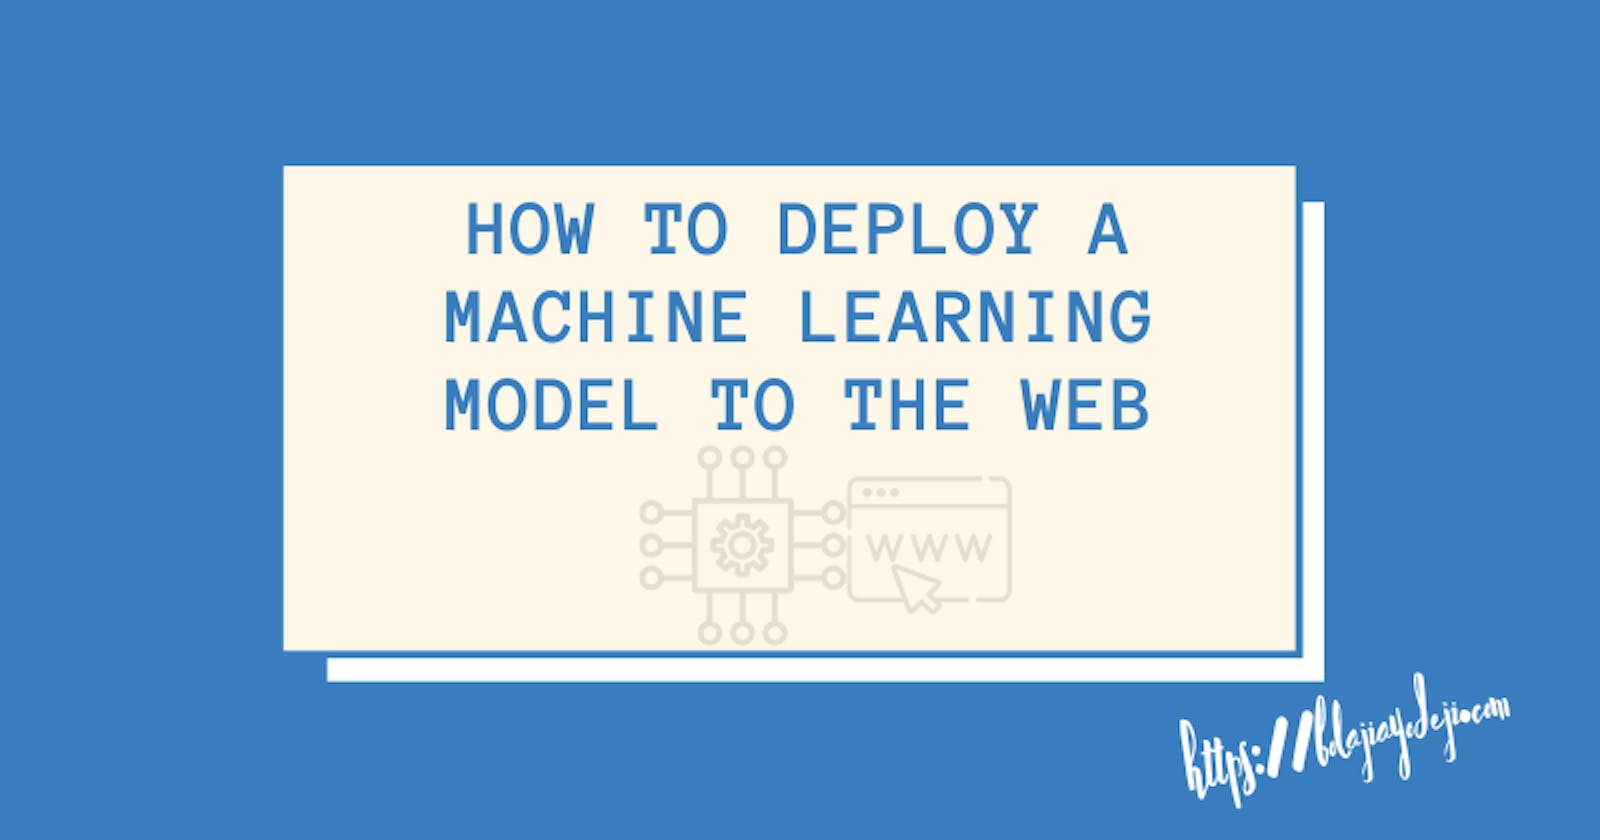 How to Deploy a Machine Learning Model to the Web